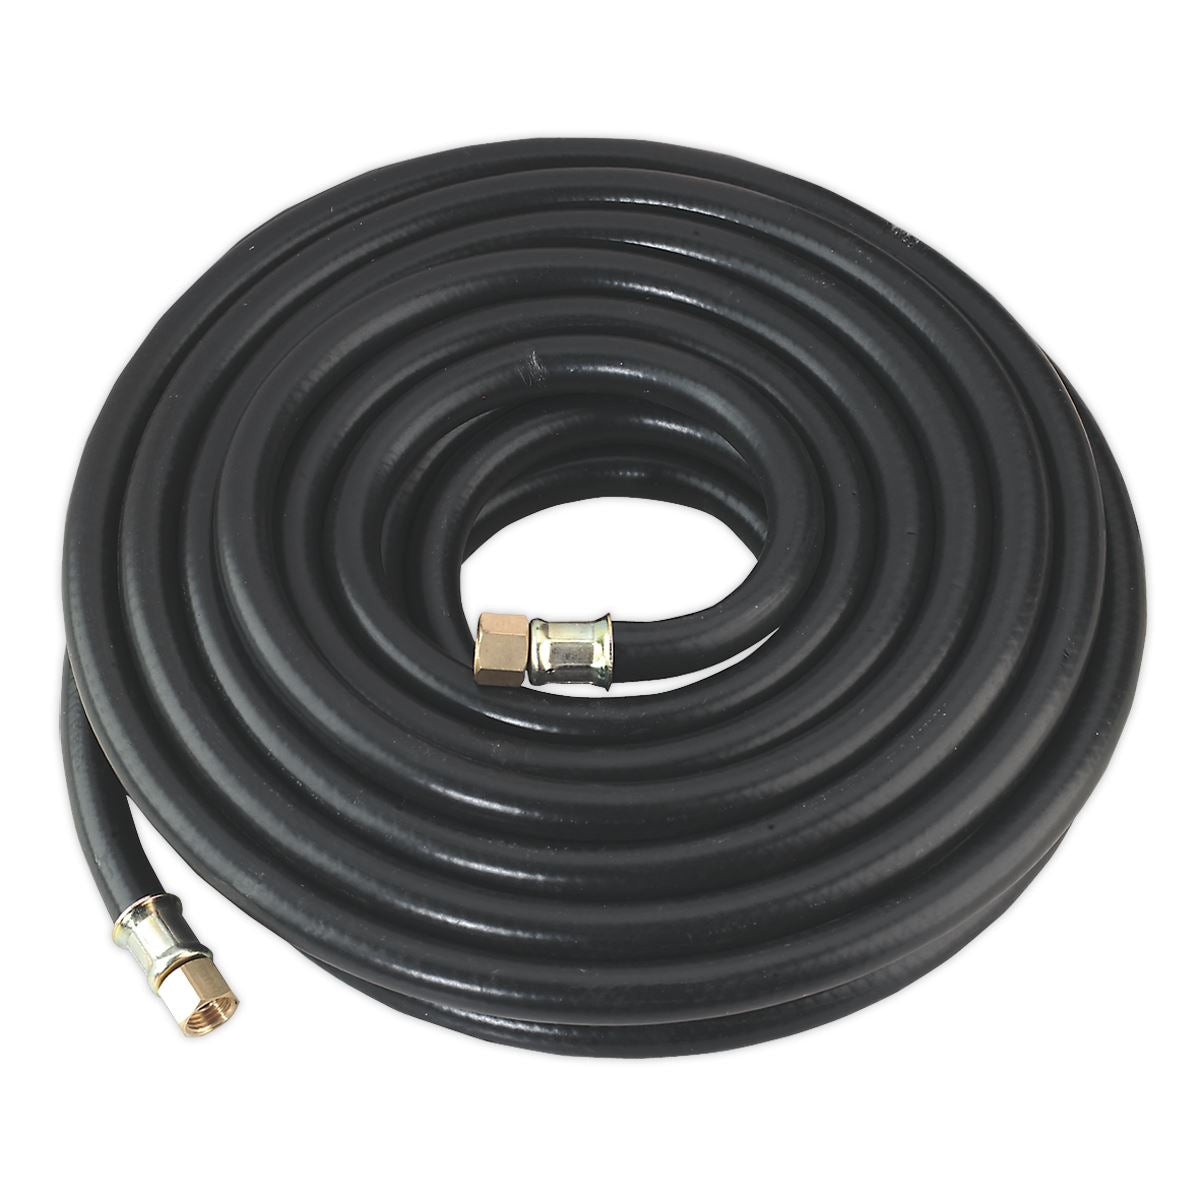 Sealey Air Hose 10m x Ø8mm with 1/4"BSP Unions Heavy-Duty